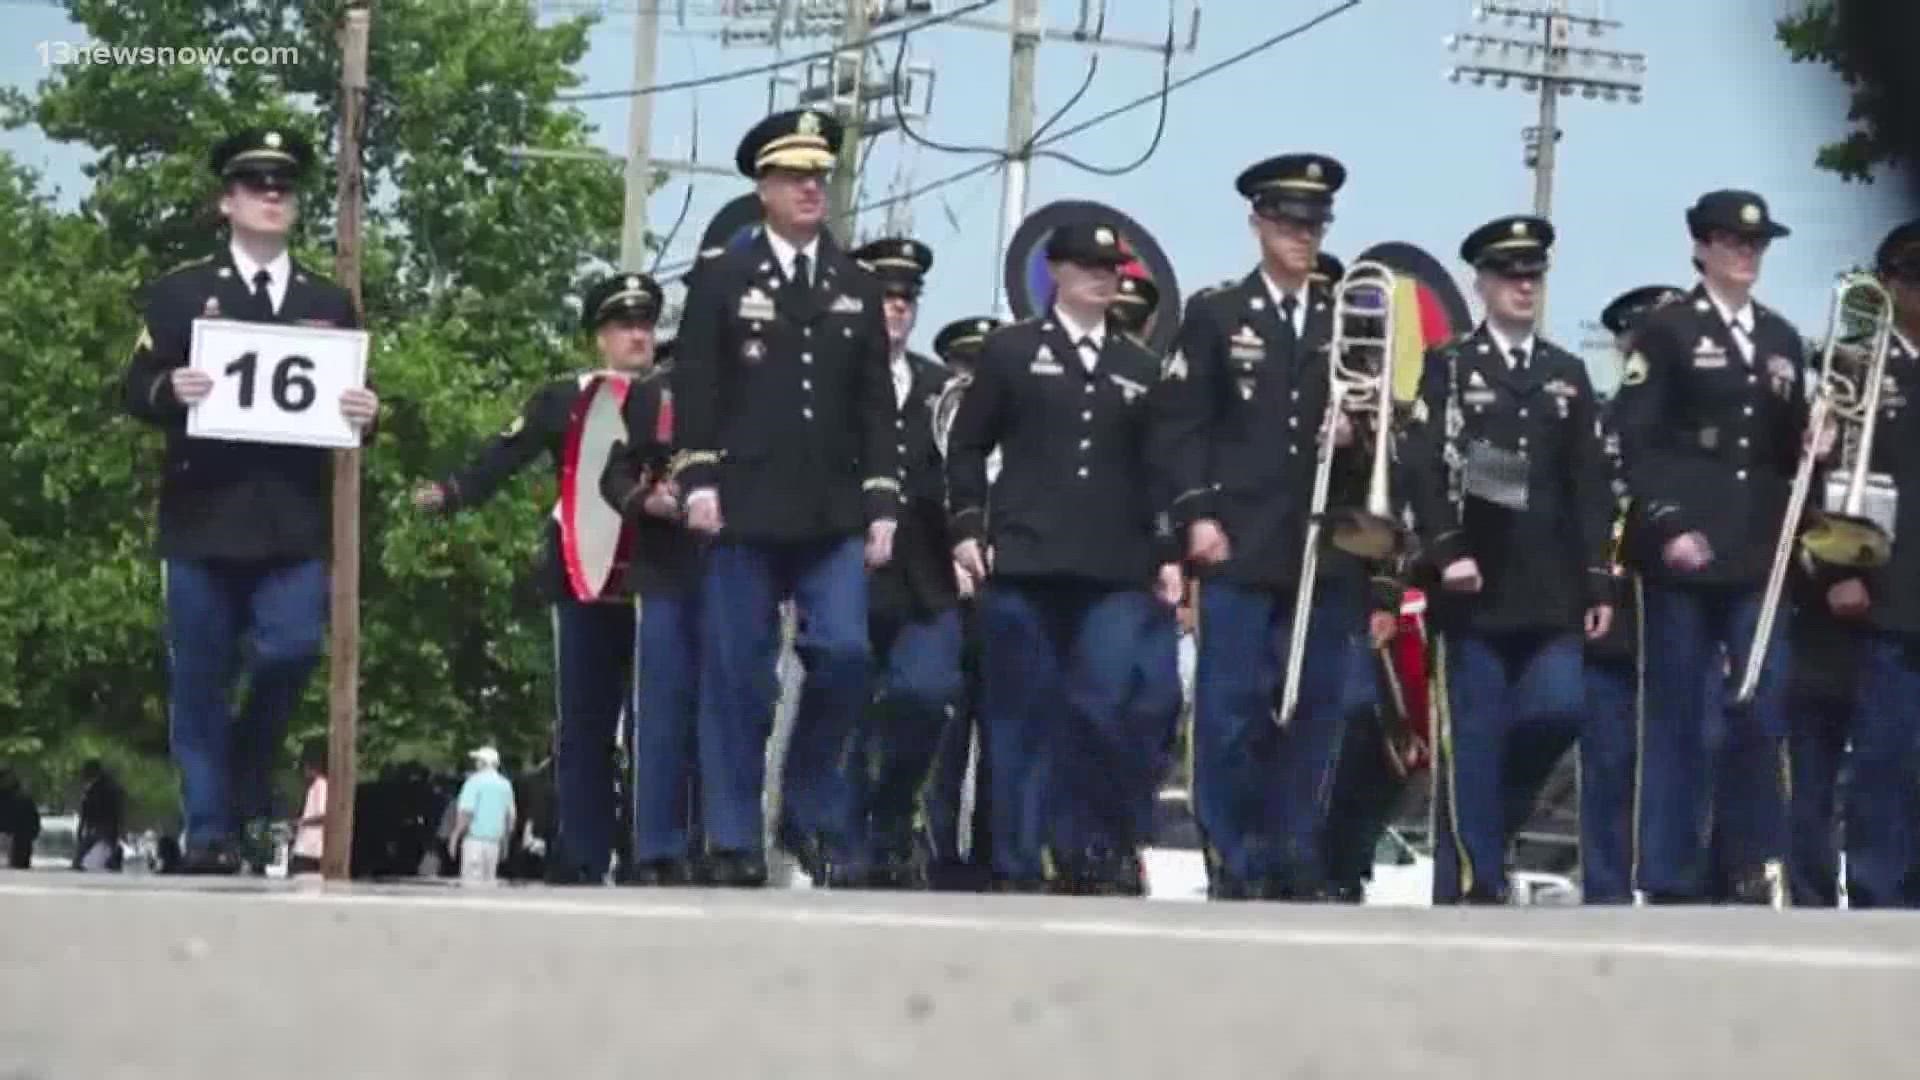 Portsmouth Memorial Day Parade returns for 138th year